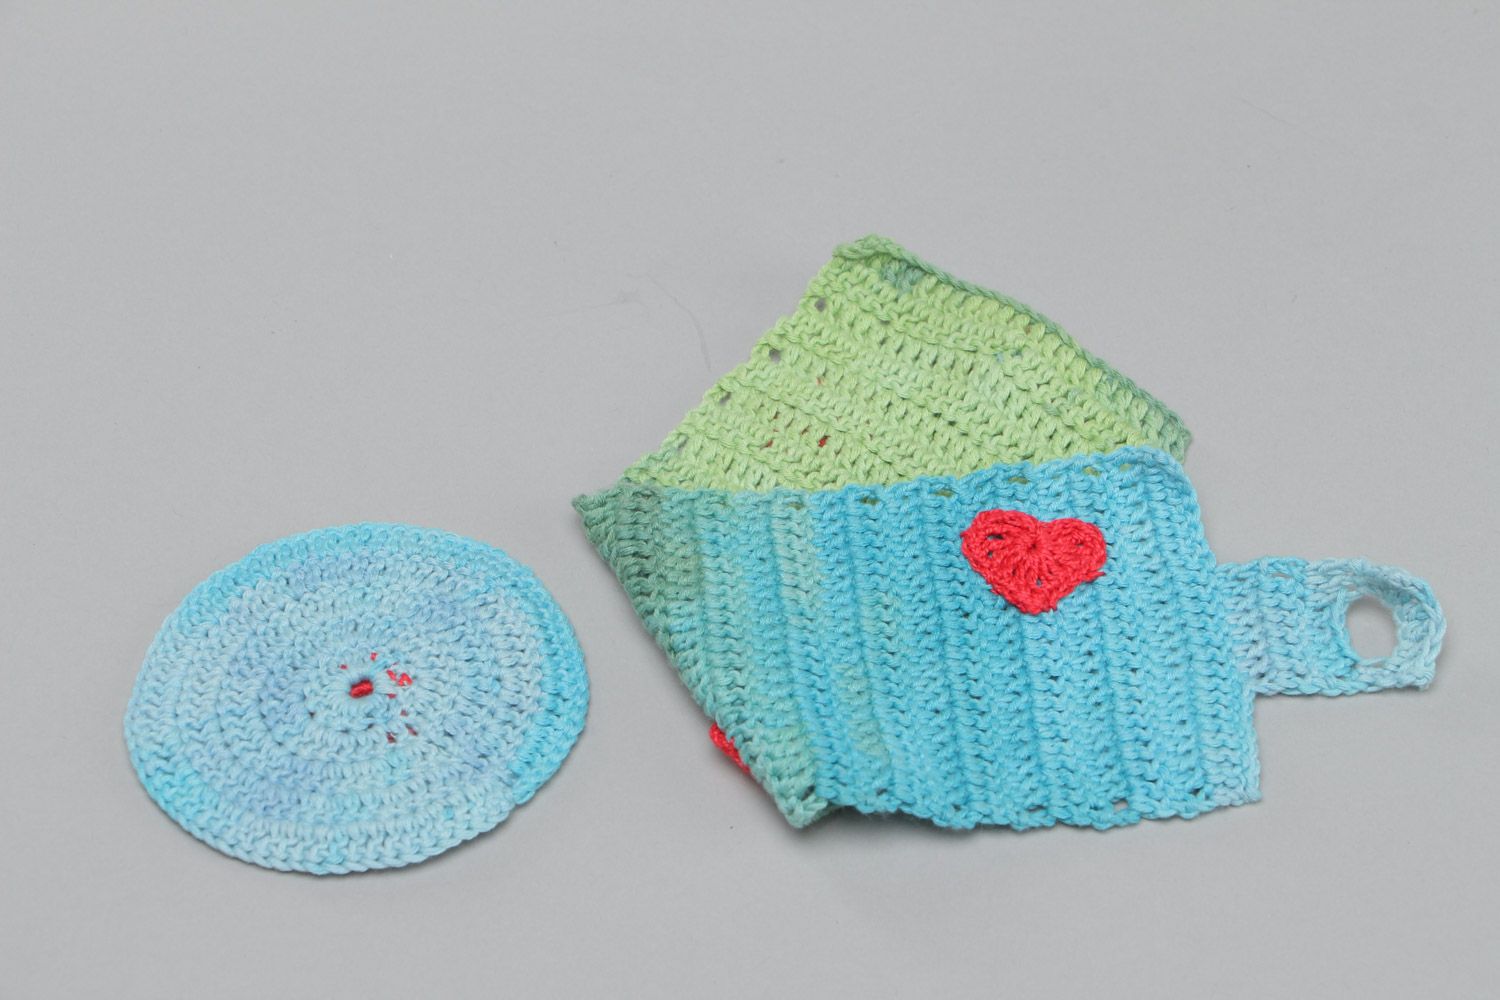 Handmade crochet cotton cup accessories set 2 items cup cozy and coaster photo 4